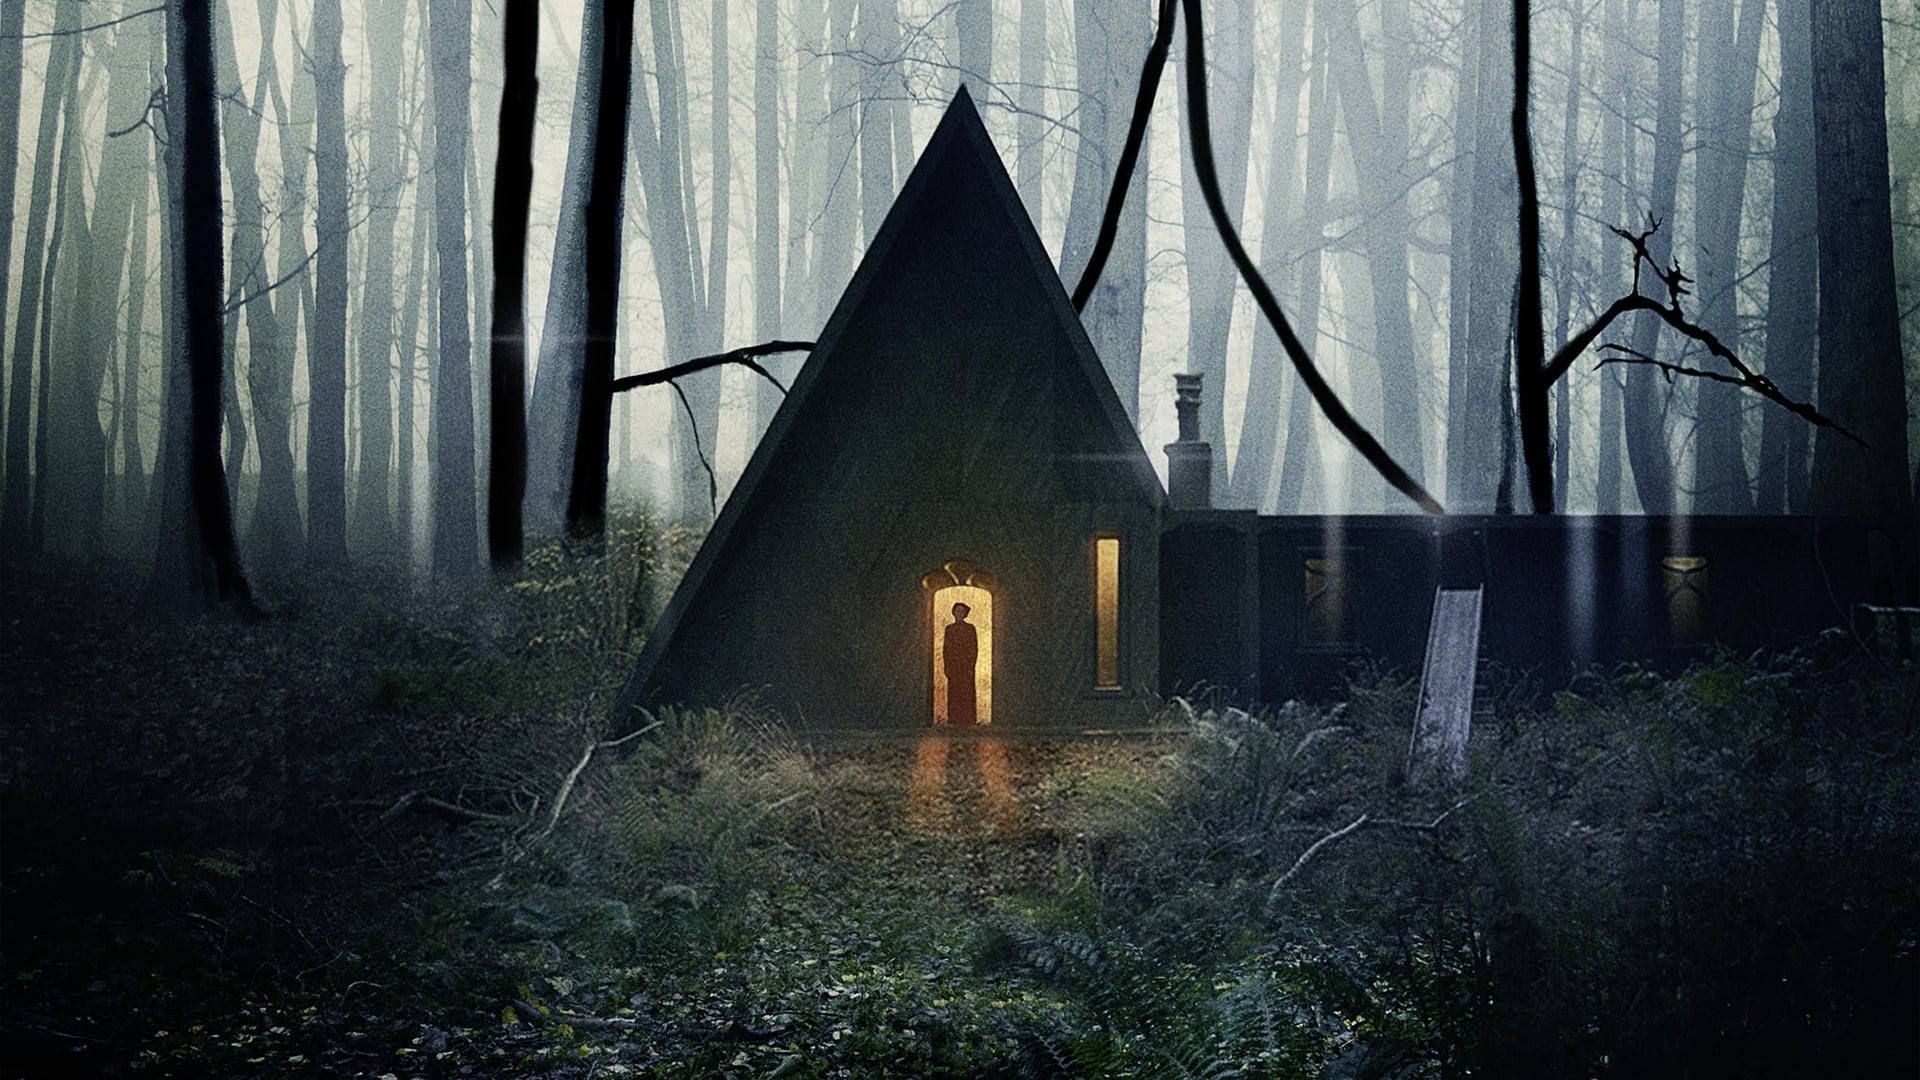 Screenshot from the film Gretel & Hansel. An A-frame cabin sits surrounded by dark woods. The cabin door is open with warm light spilling out while a dark figure of a woman stands in the doorway. 